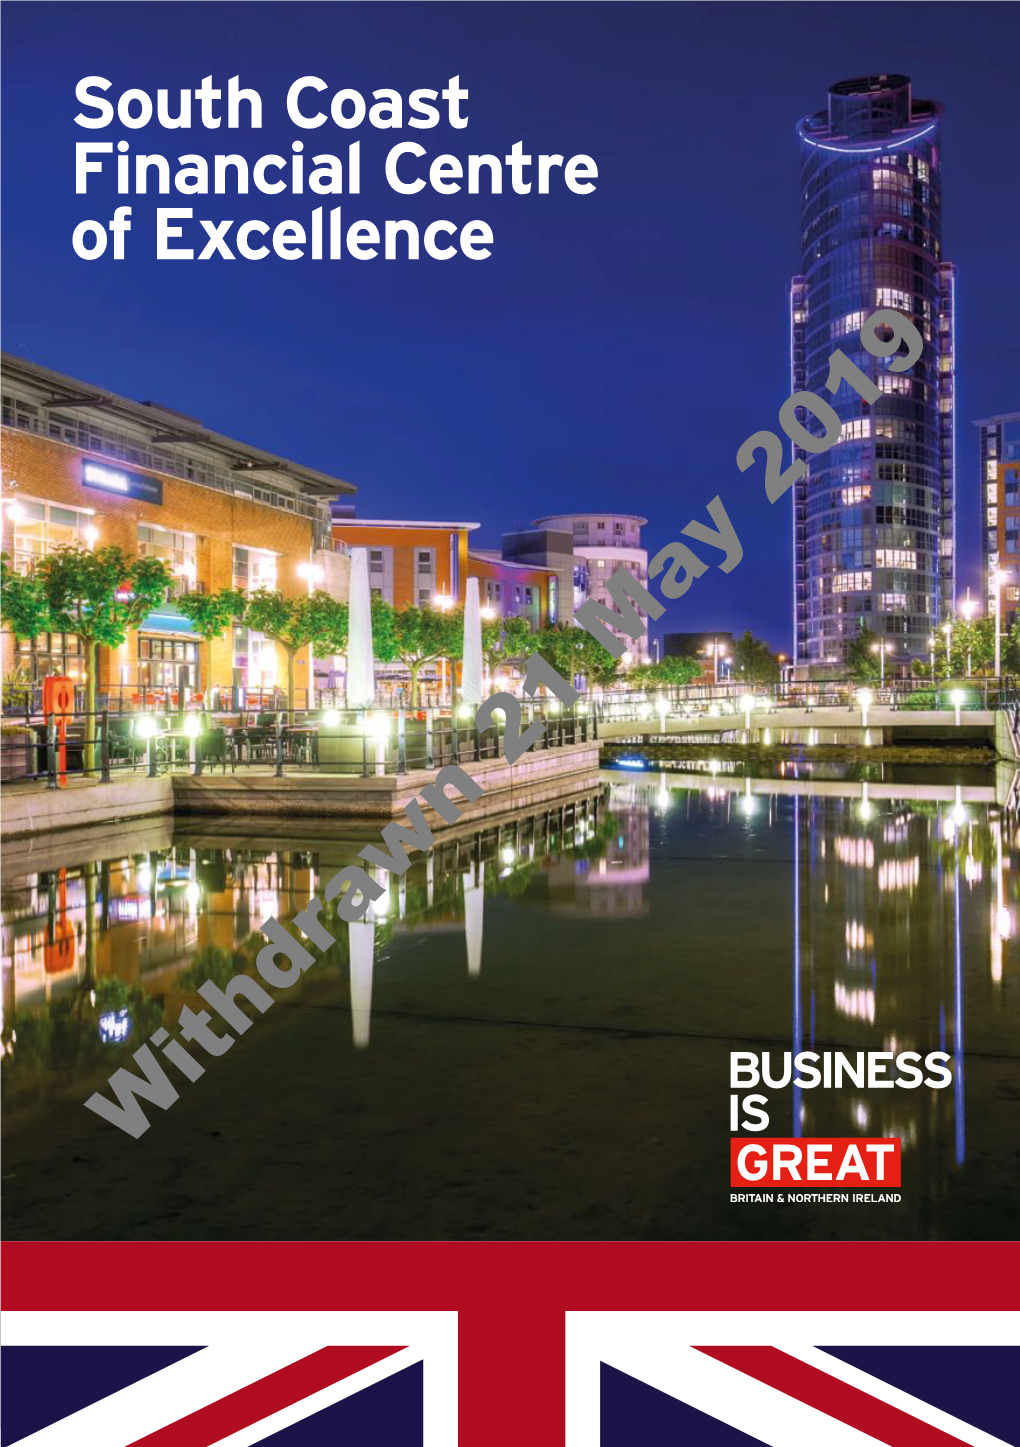 South Coast Financial Centre of Excellence